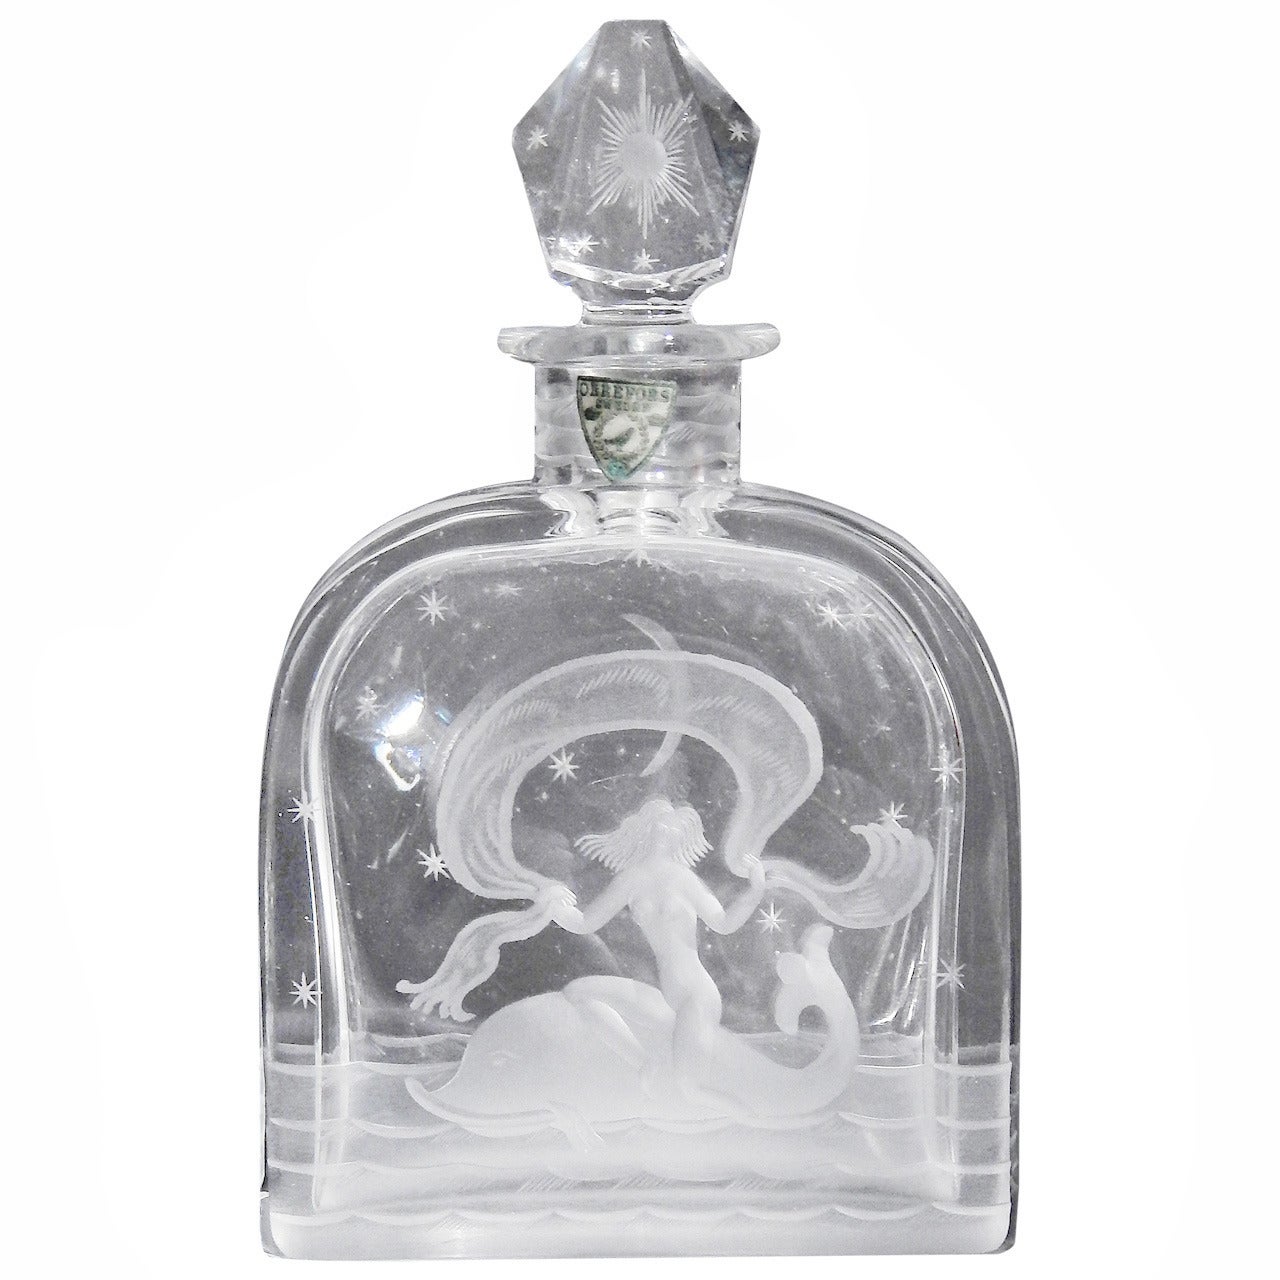 "Mermaid Riding Dolphin, " Rare Engraved Art Deco Perfume Flask by Orrefors